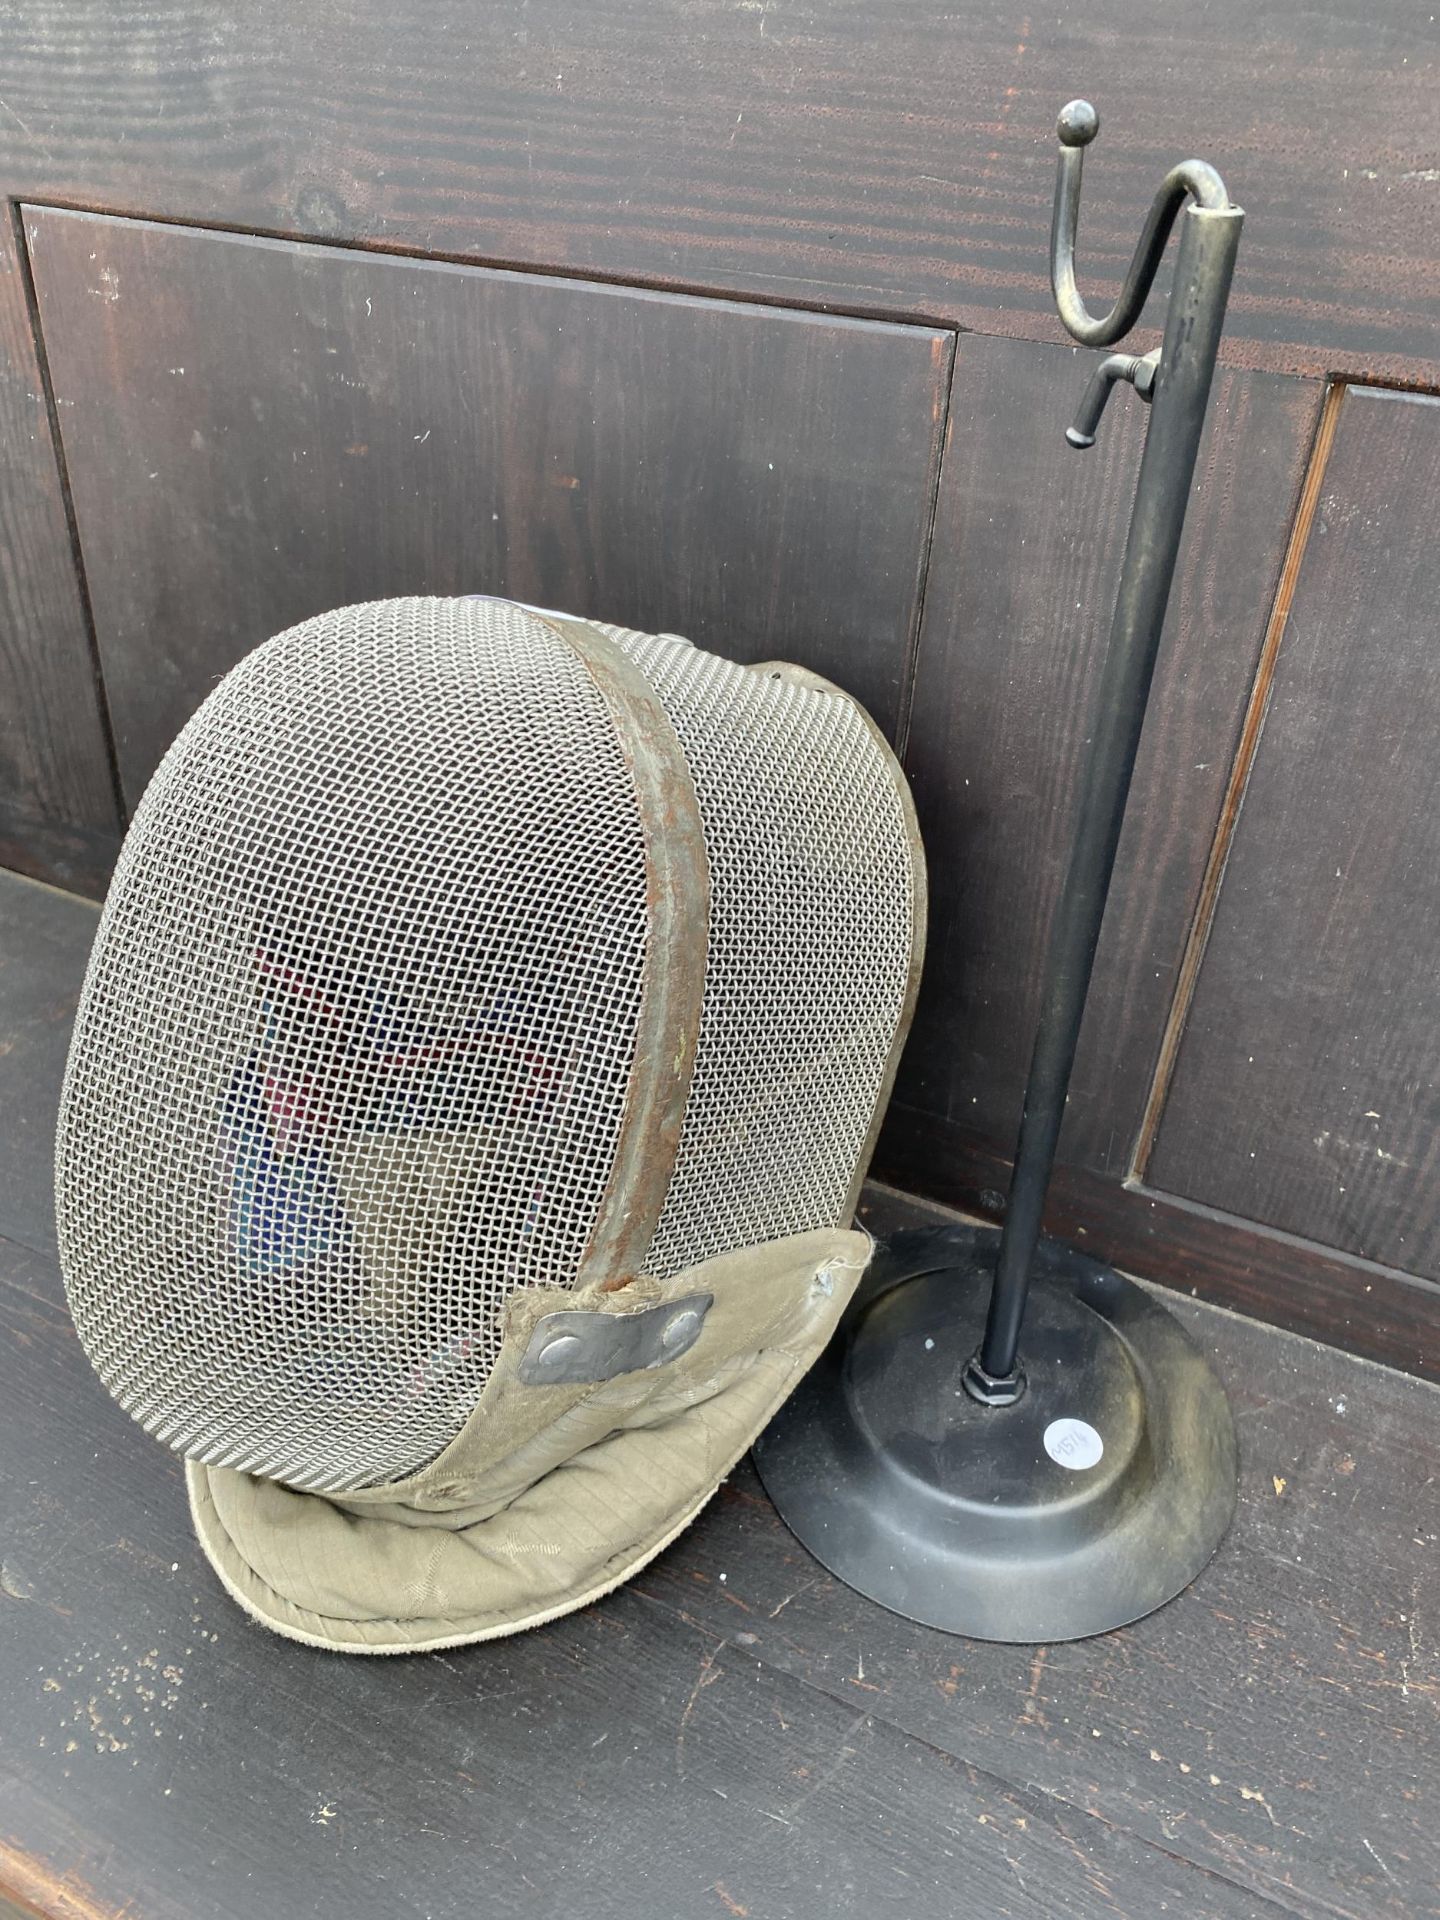 A VINTAGE FRANCE-LAMES FENCING FACE GUARD WITH STAND - Image 5 of 5